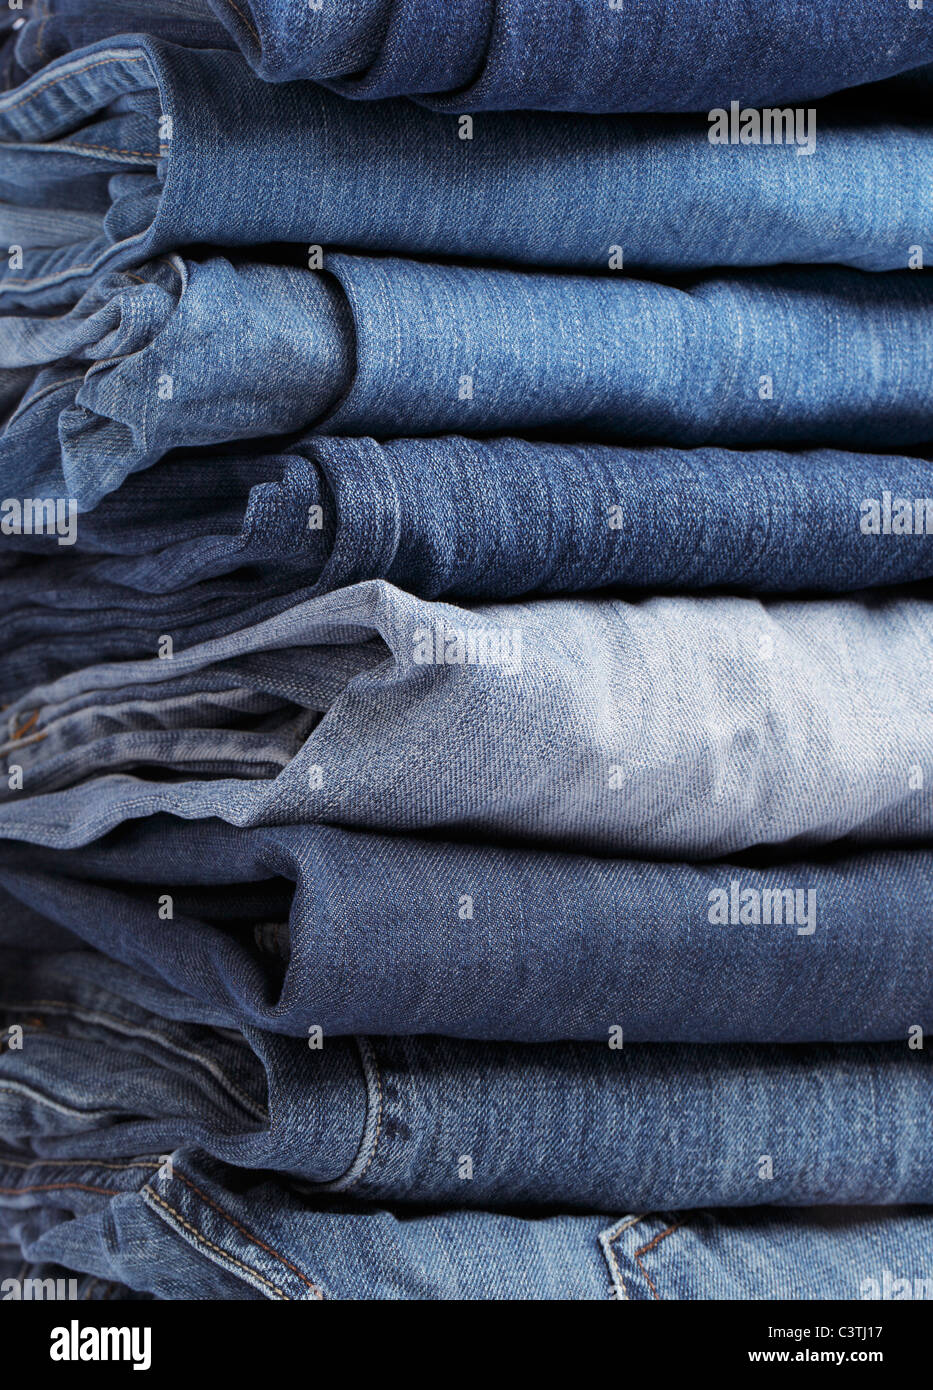 Different shades of blue jeans stacked Stock Photo - Alamy